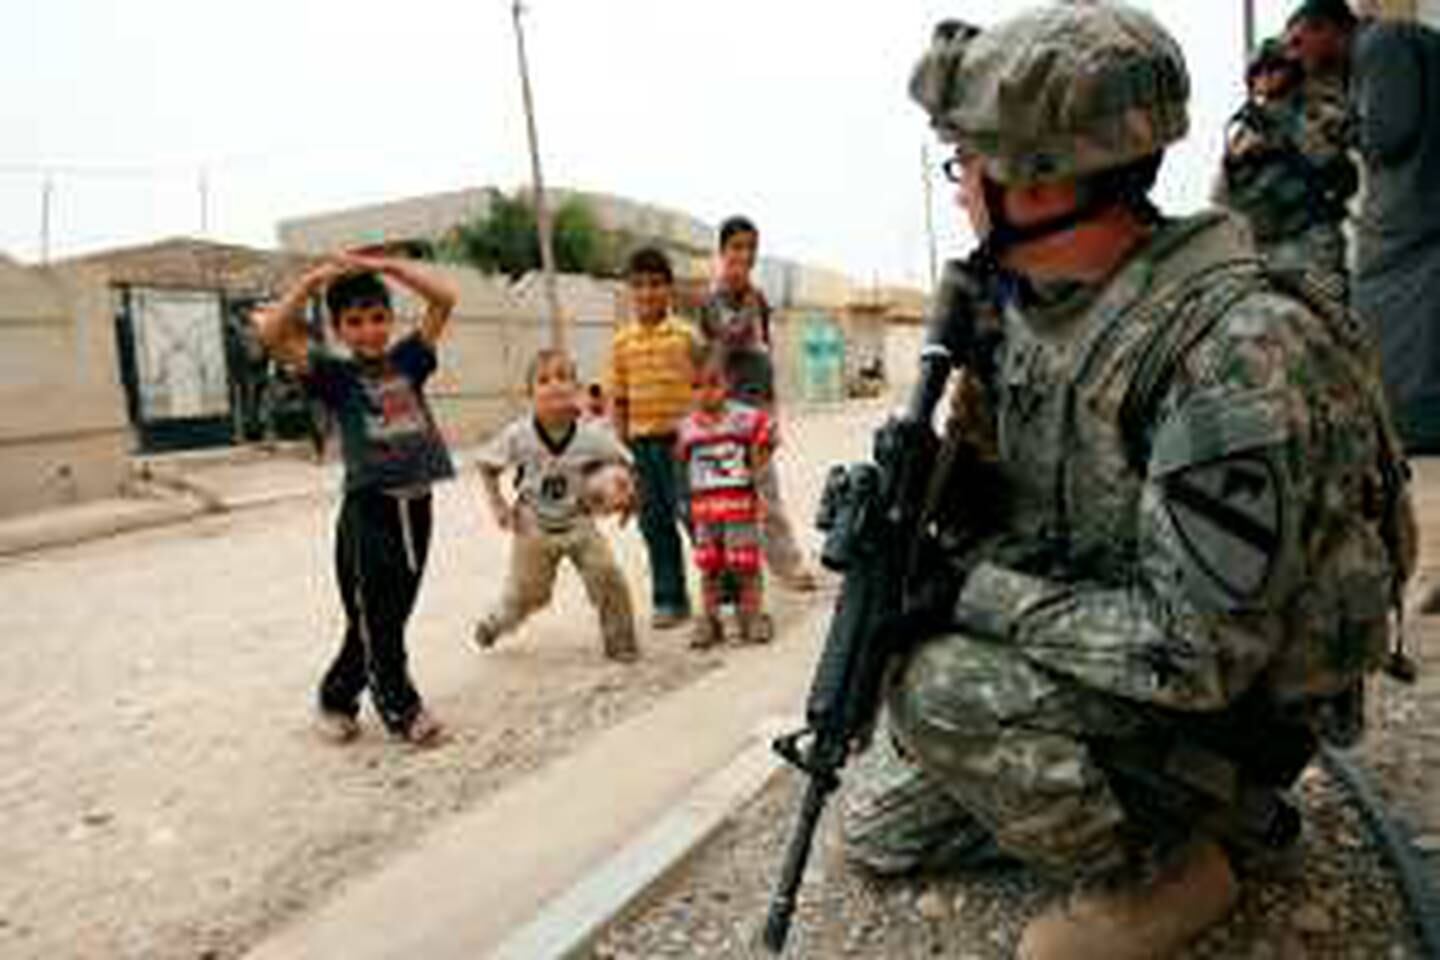 Iraqi children watch a US Army soldier from the 3rd Battalion 8th Cavalry Division on patrol in the Al-Naherwa district of the northern Iraqi city of Mosul on June 17, 2009, one day after a US soldier was killed and six people were wounded in violence across Iraq and two weeks before the scheduled American pullout from the country's urban centres.  AFP PHOTO / ALI AL-SAADI *** Local Caption ***  205570-01-08.jpg *** Local Caption ***  205570-01-08.jpg